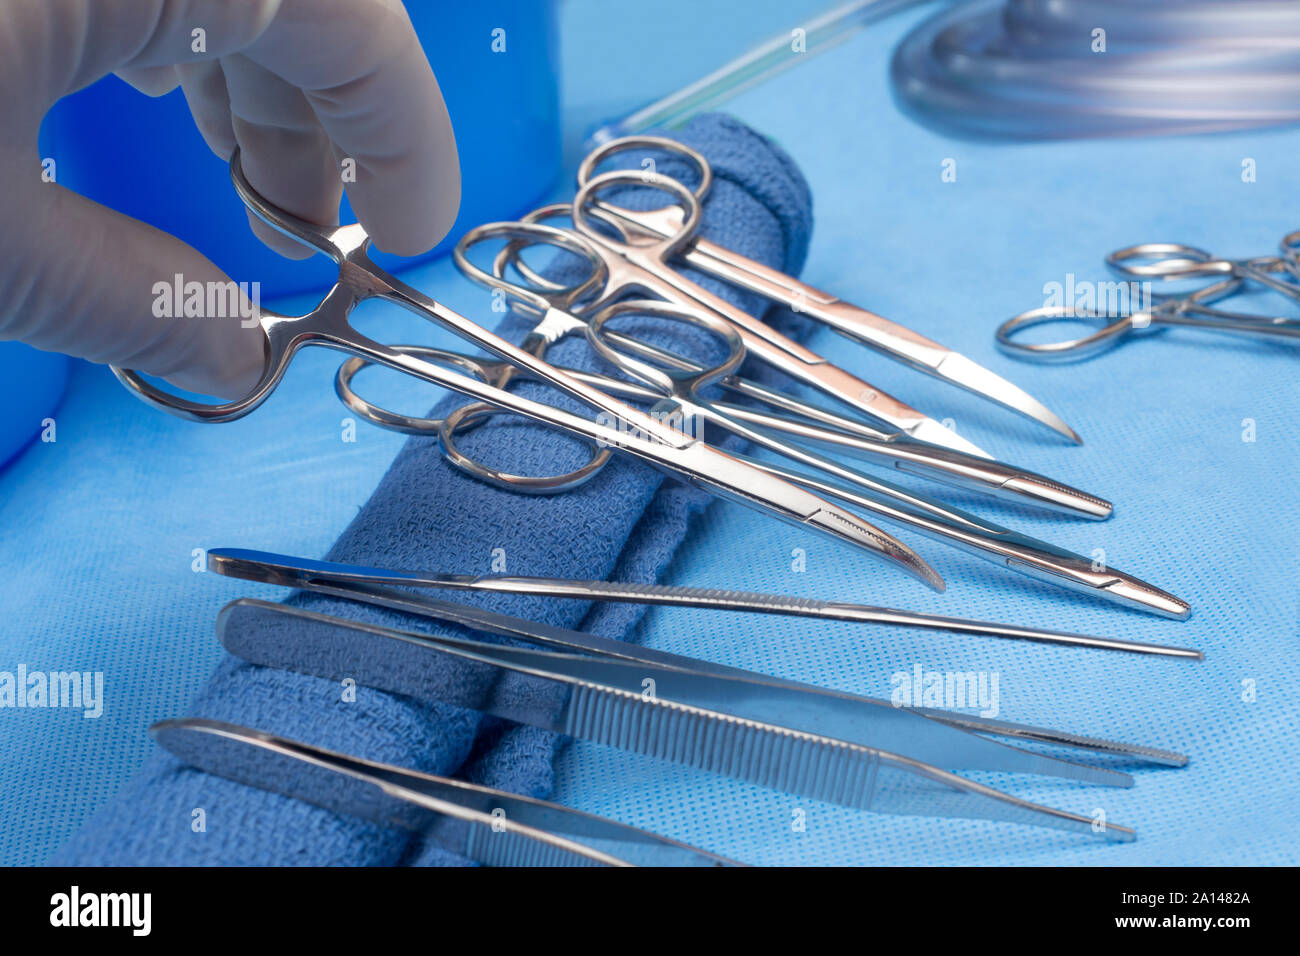 Surgeon selects curved hemostats from sterile table. Stock Photo